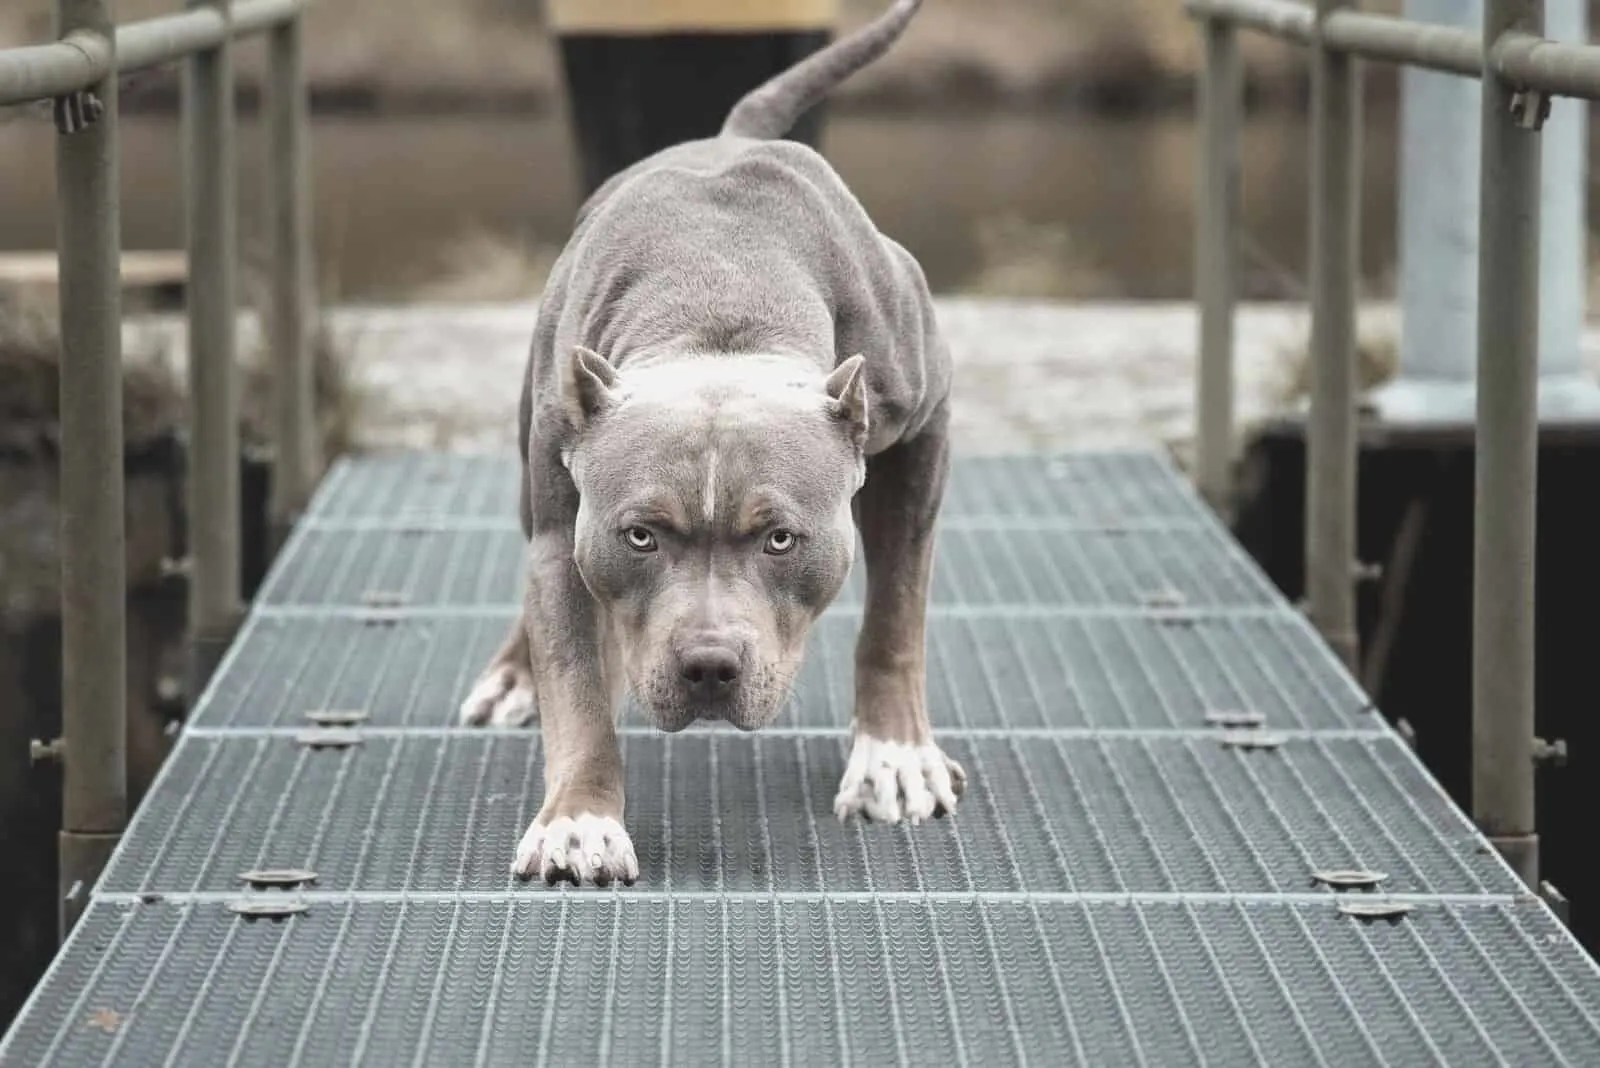 Angry Pitbull American Bully standing in the middle of a metal bridge